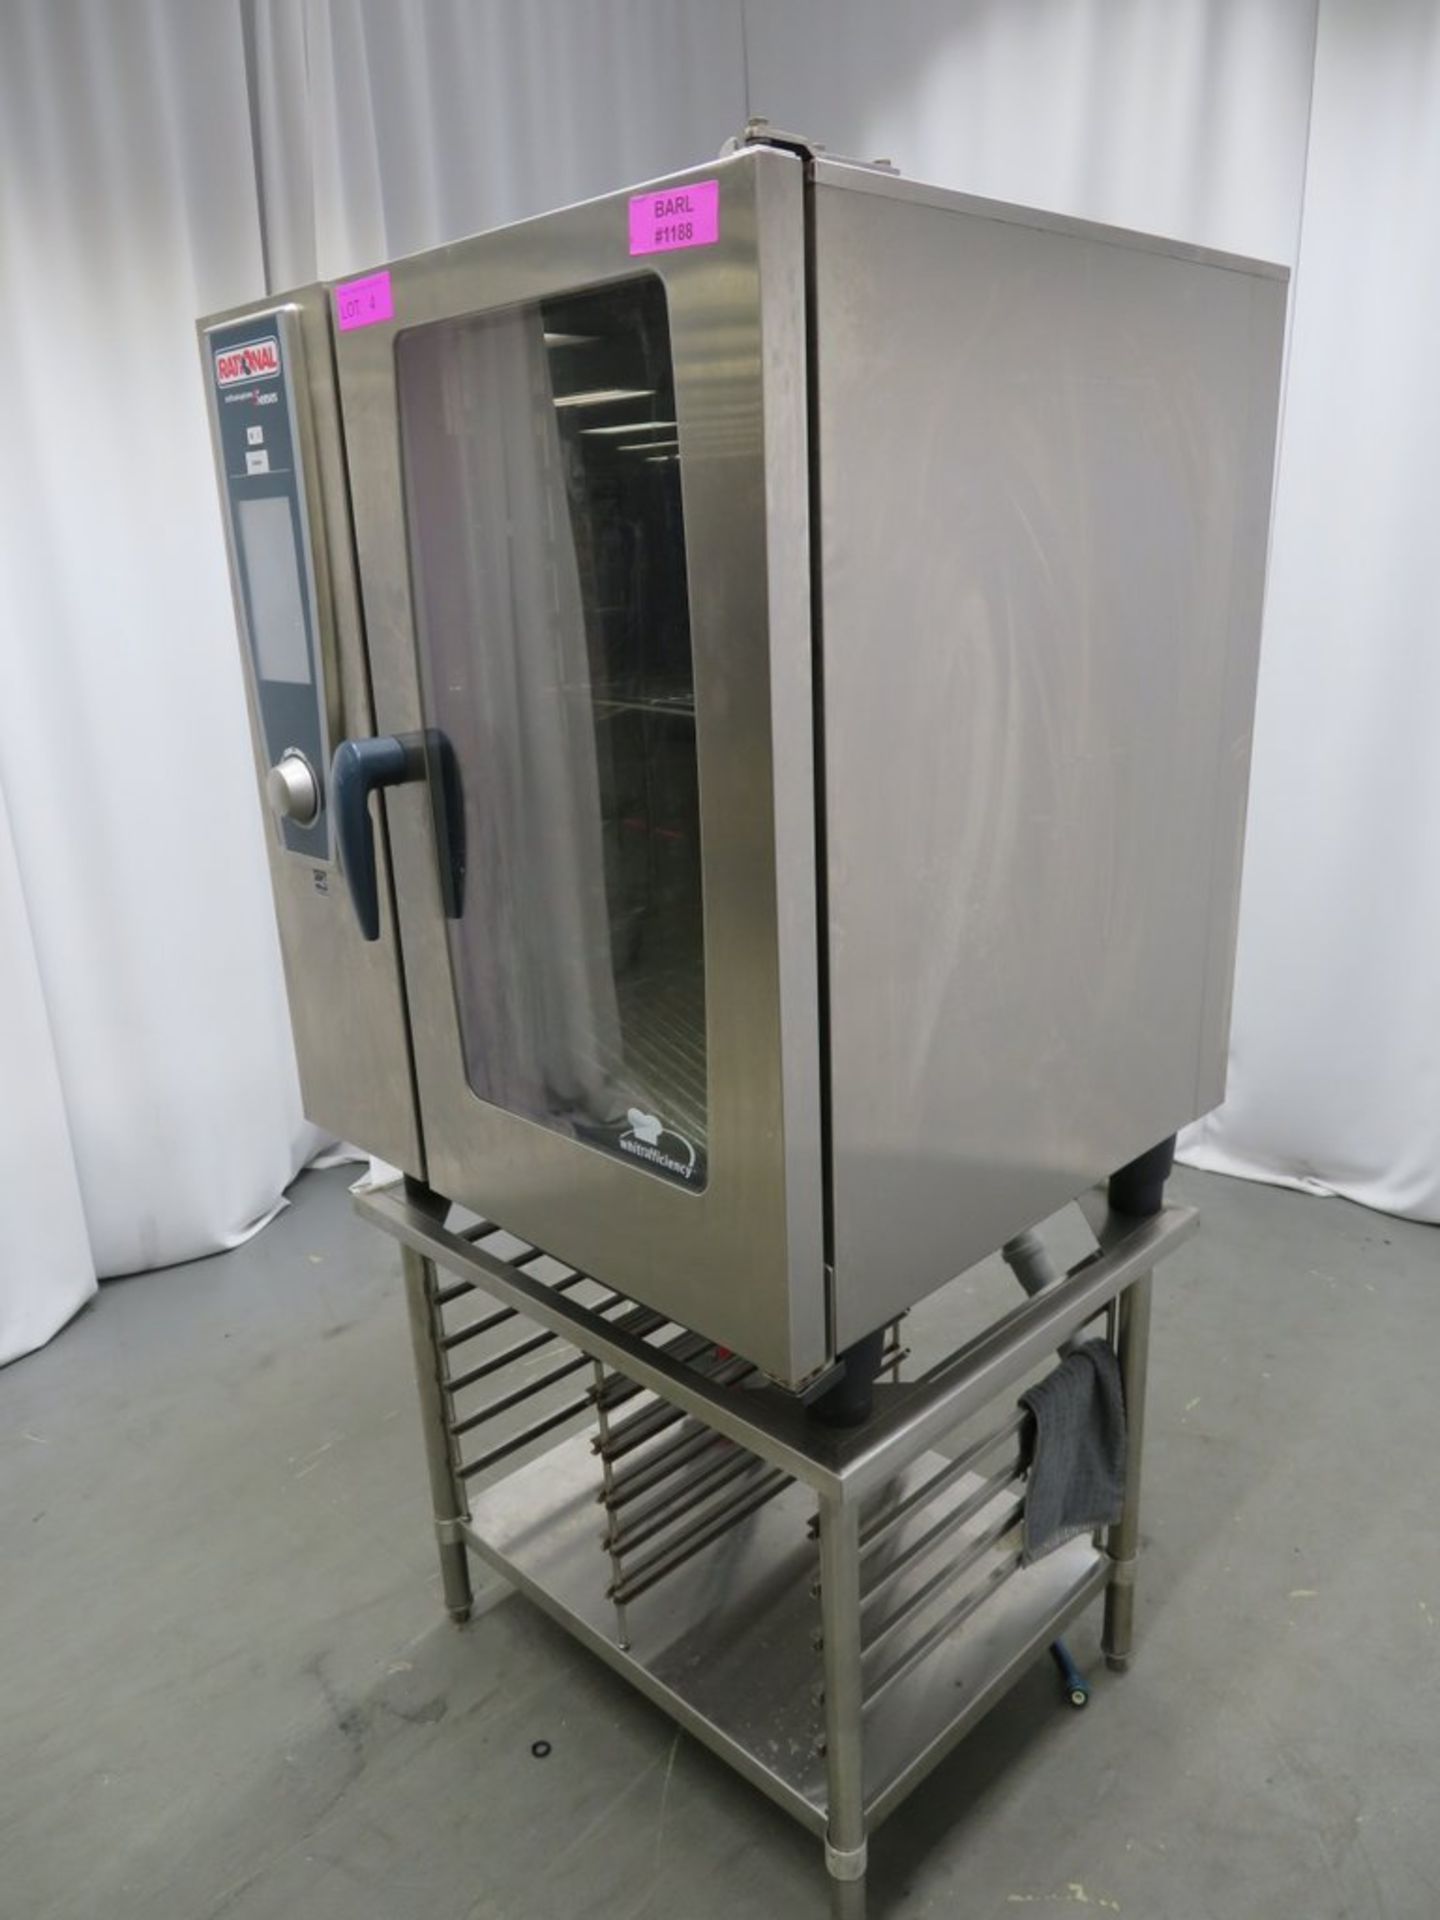 Rational SCC WE 101 5 senses 10 grid combi oven, 3 phase electric - Image 3 of 16